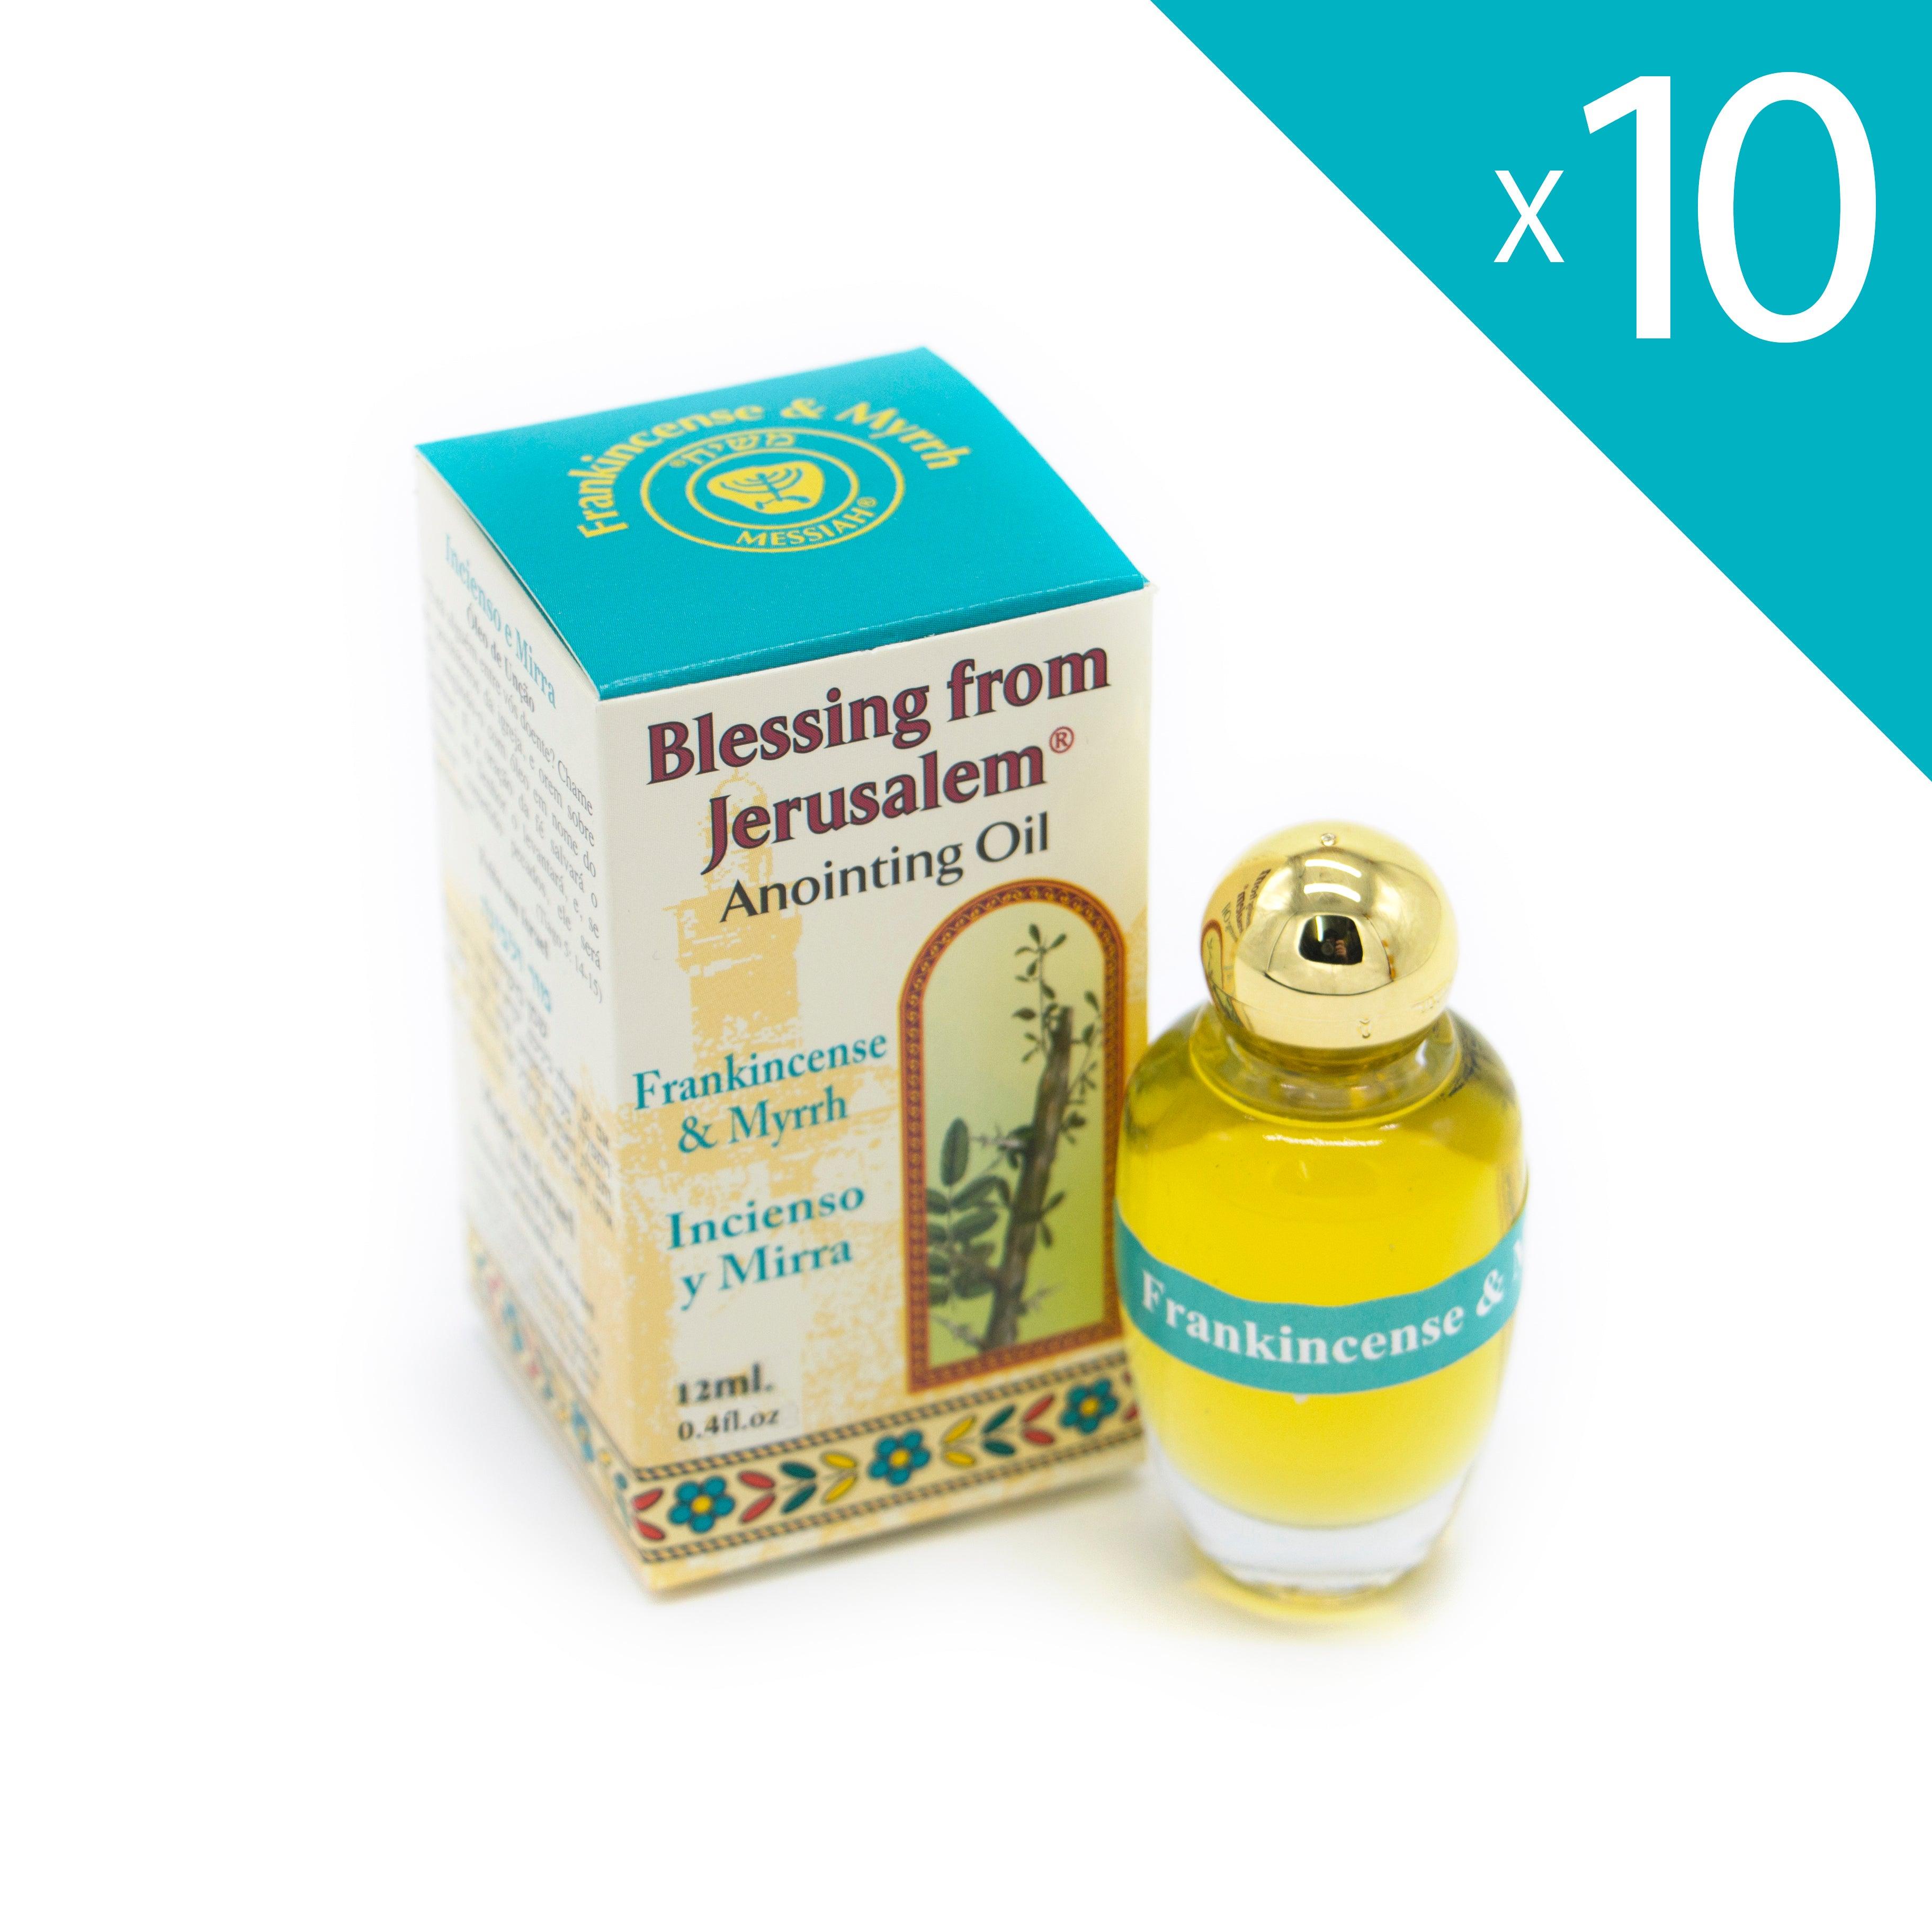 Second Coming Anointing Oil 'Frankincense and Myrrh' 10 ml